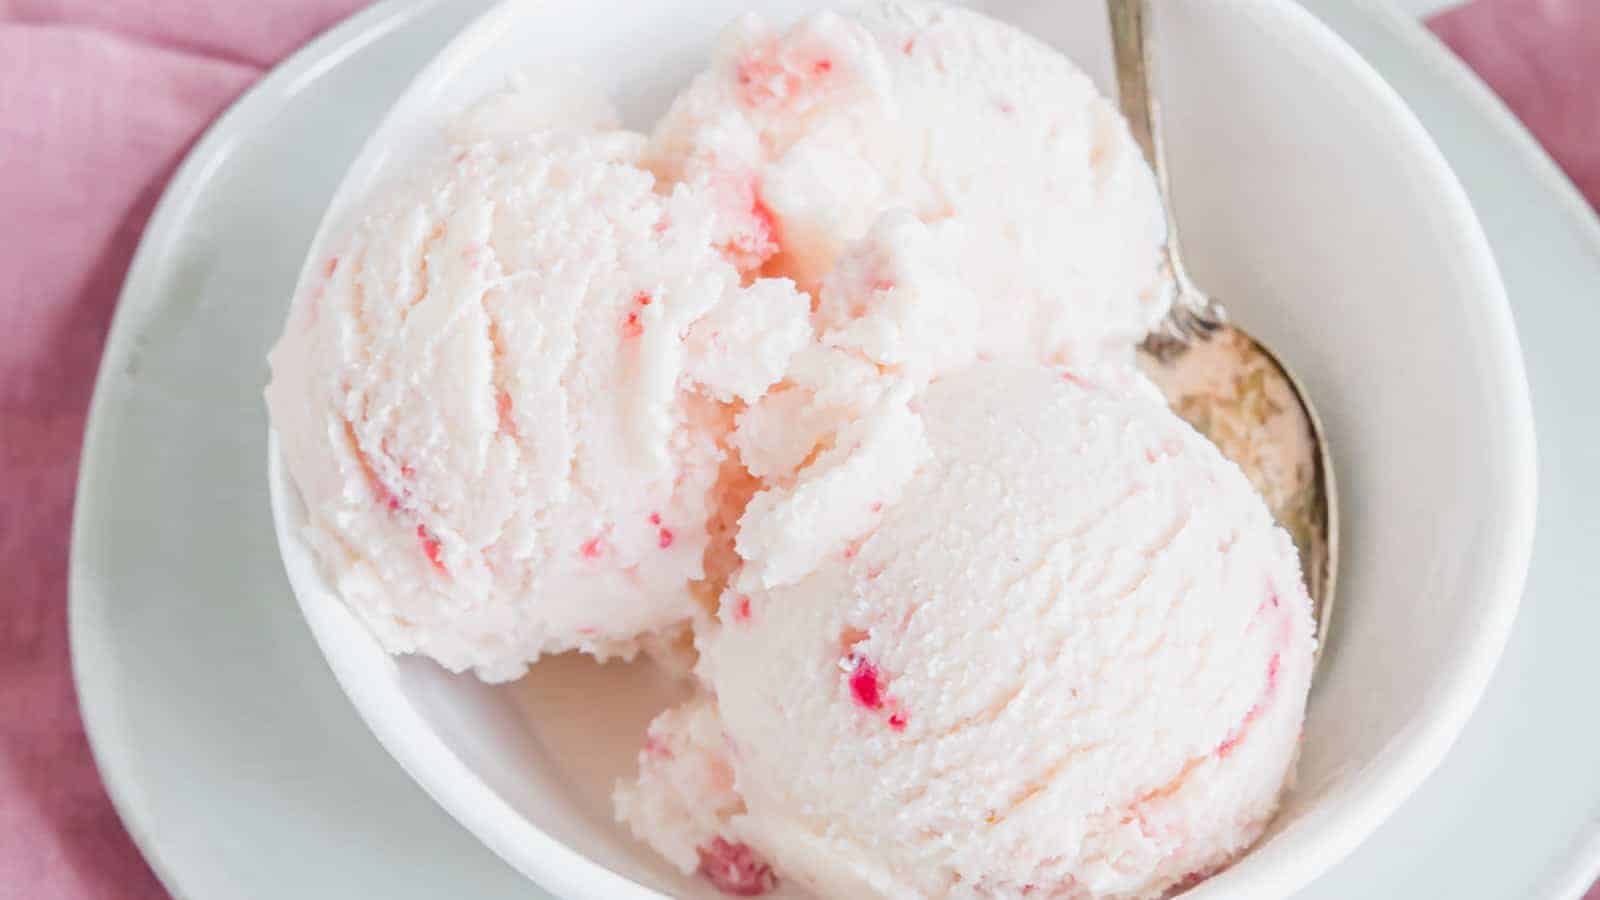 Strawberry kefir ice cream in a white bowl with a silver spoon.